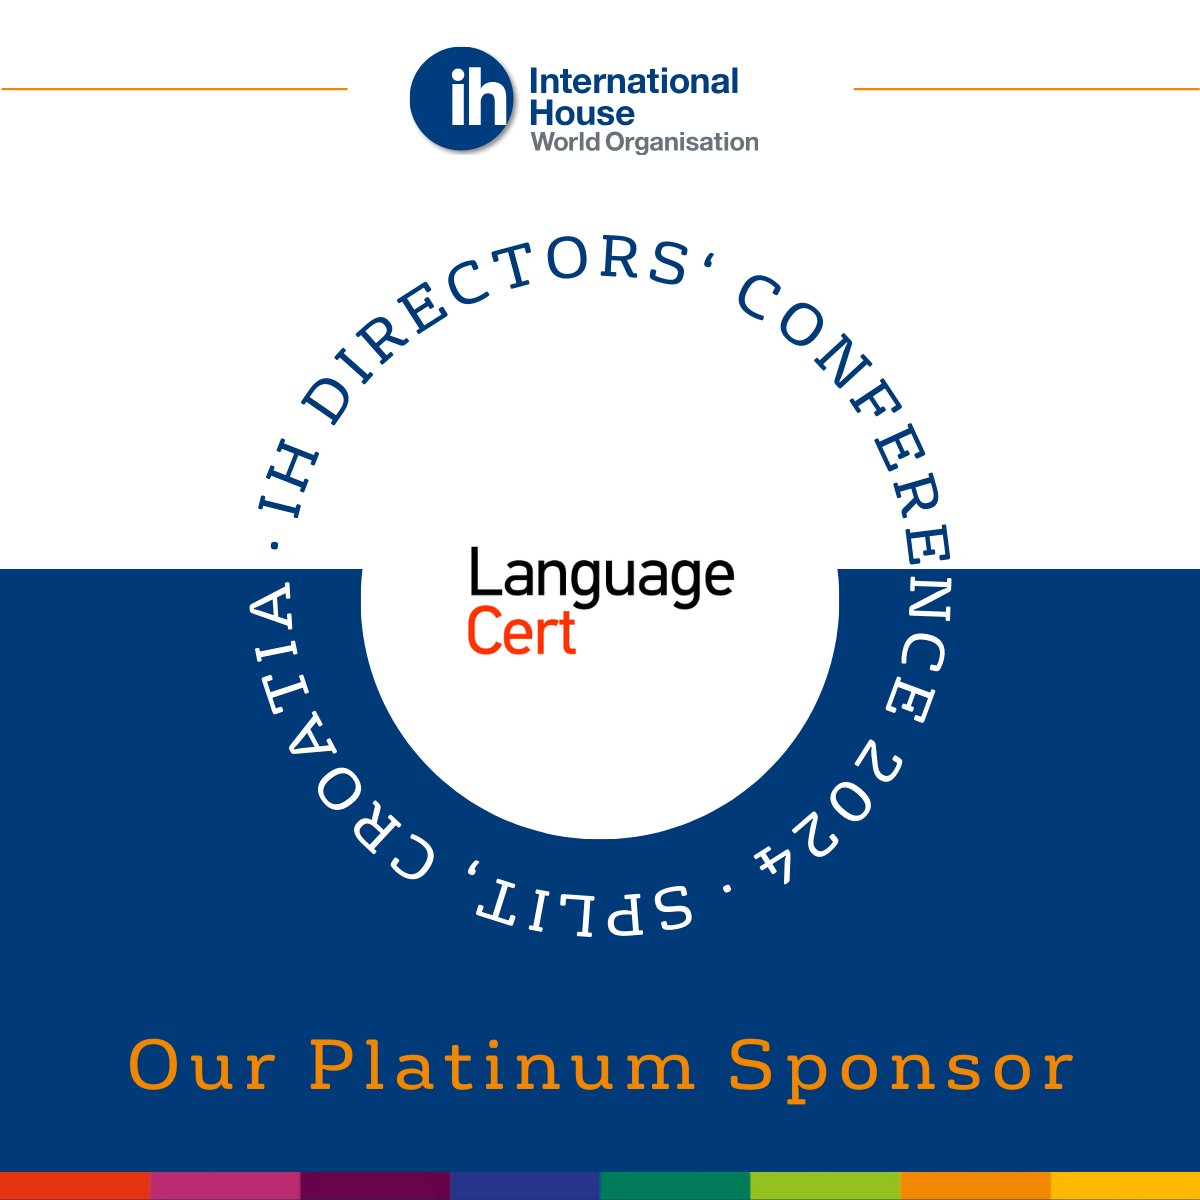 Thank you 🙌 to our Platinum Sponsors for the IH Directors’ Conference 2024, LanguageCert.

LanguageCert is an organization dedicated to language skills assessment and certification. Learn more here 👇selt.languagecert.org 

#IHDirConf2024 #ihworld #InternationalHouse